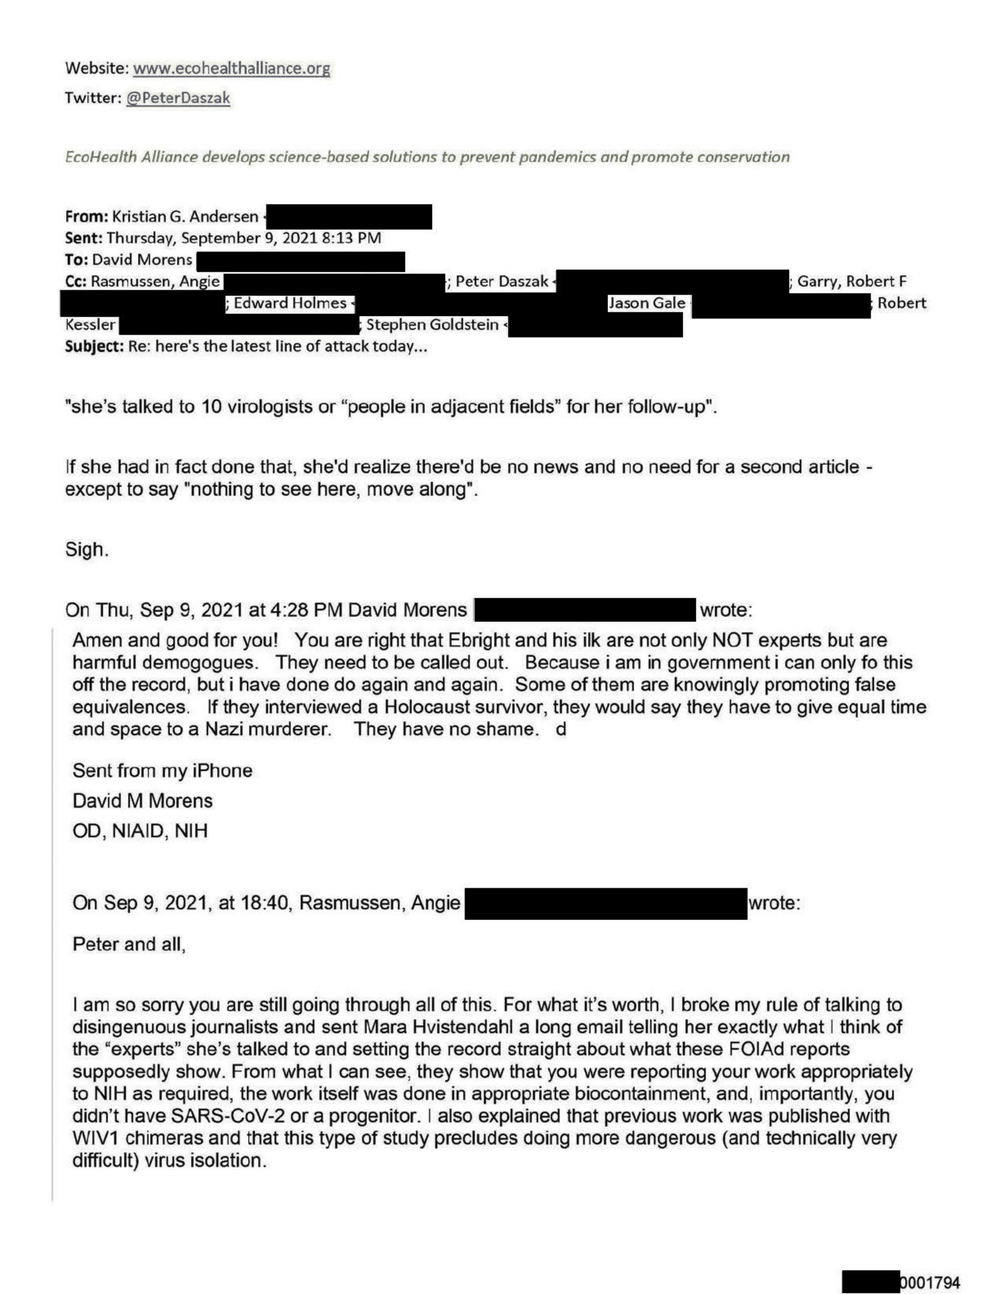 Page 21 from David Morens NIH Emails Redacted